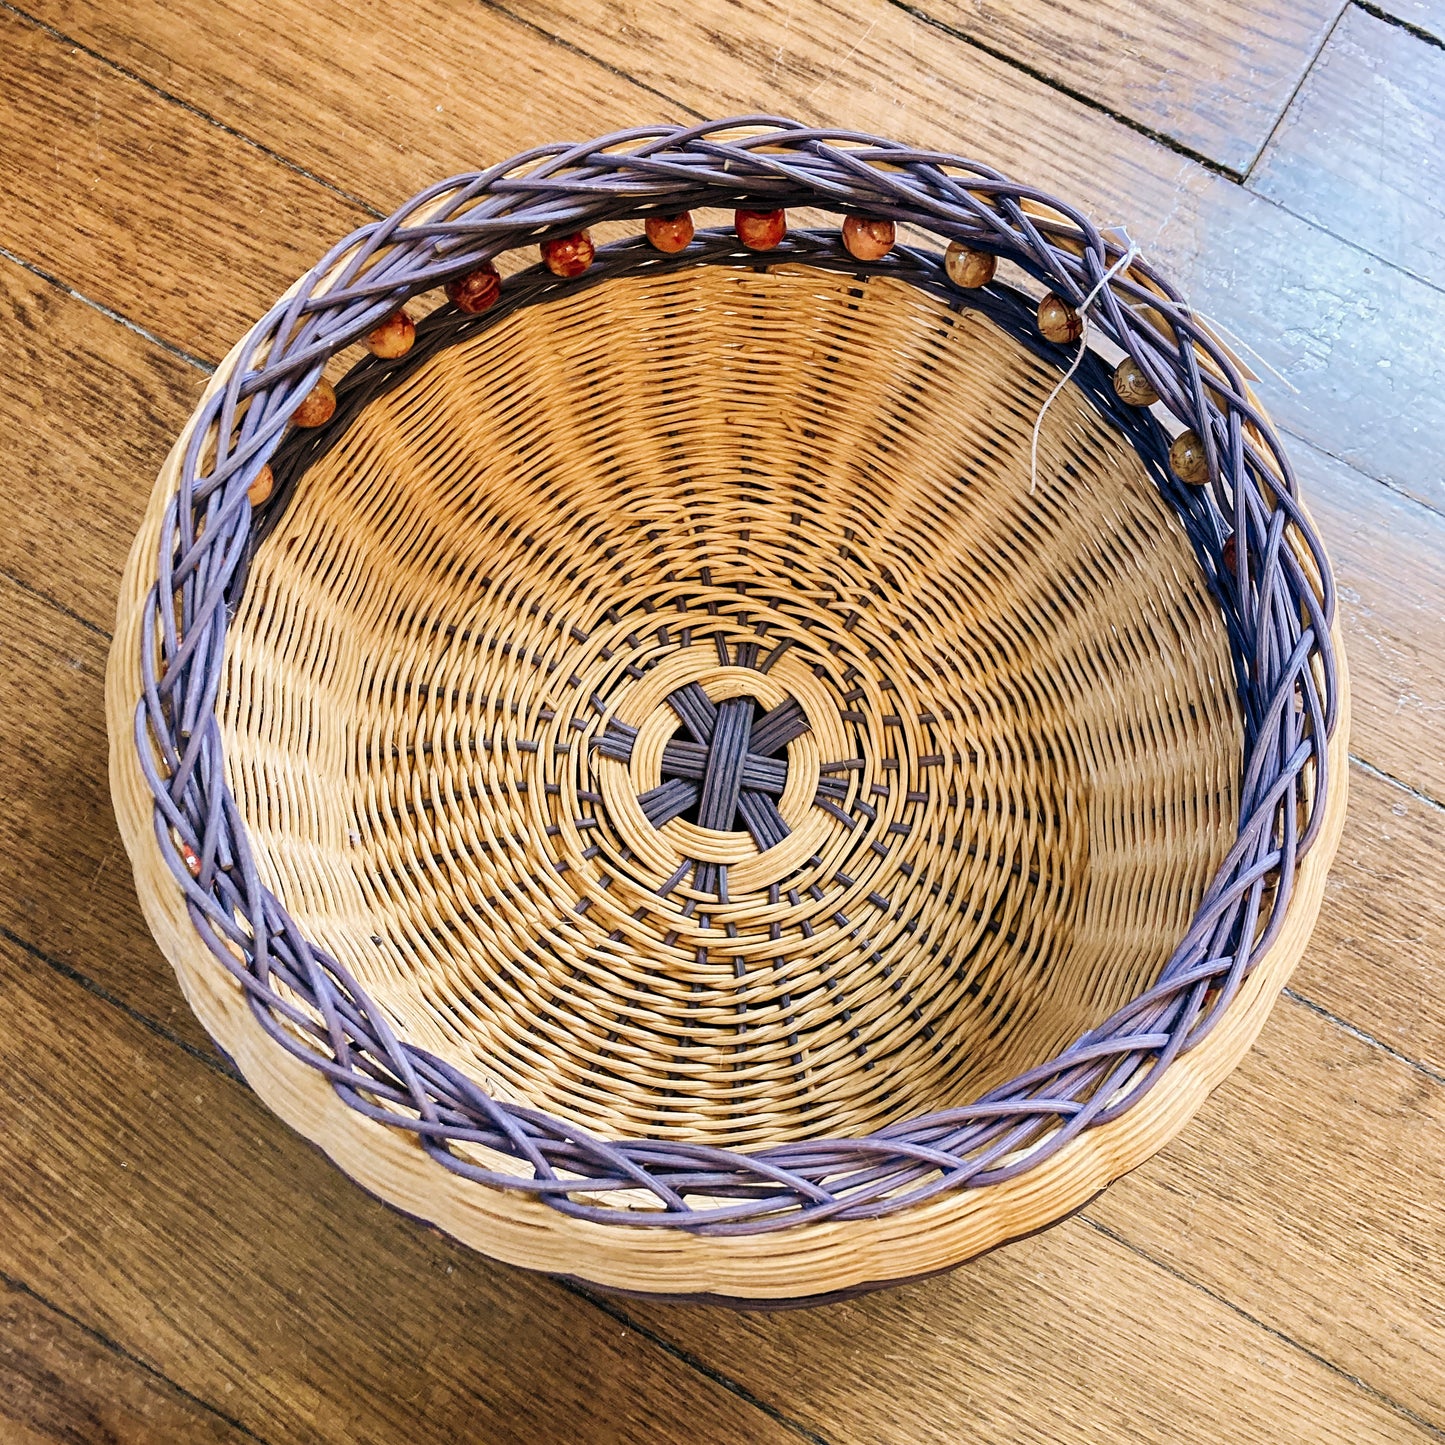 Hand-Woven Beaded Fruit Basket by Trista Rothgerber